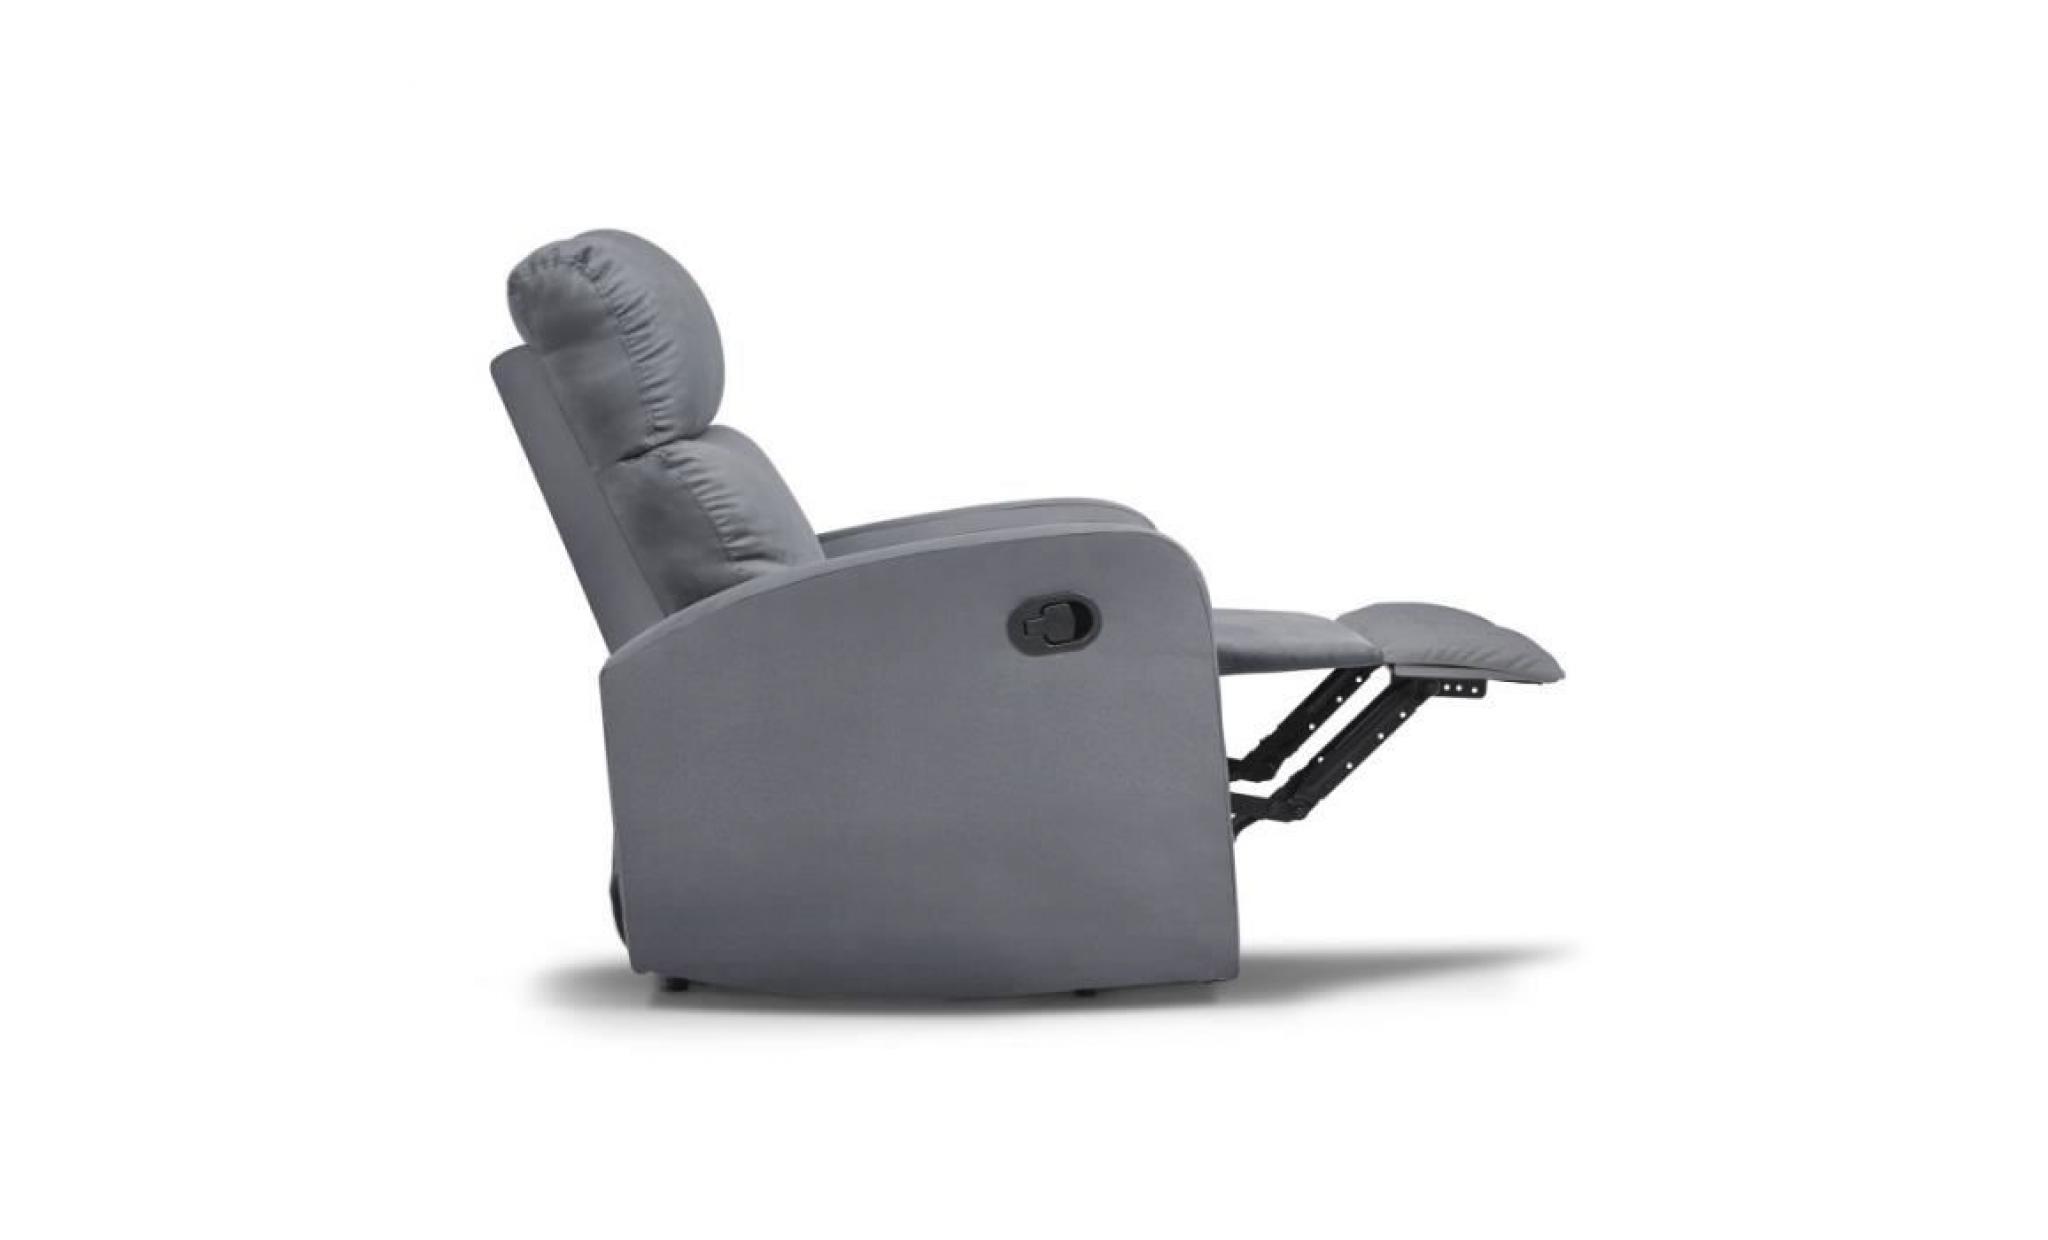 fauteuil relax inclinable gris anthracite pas cher